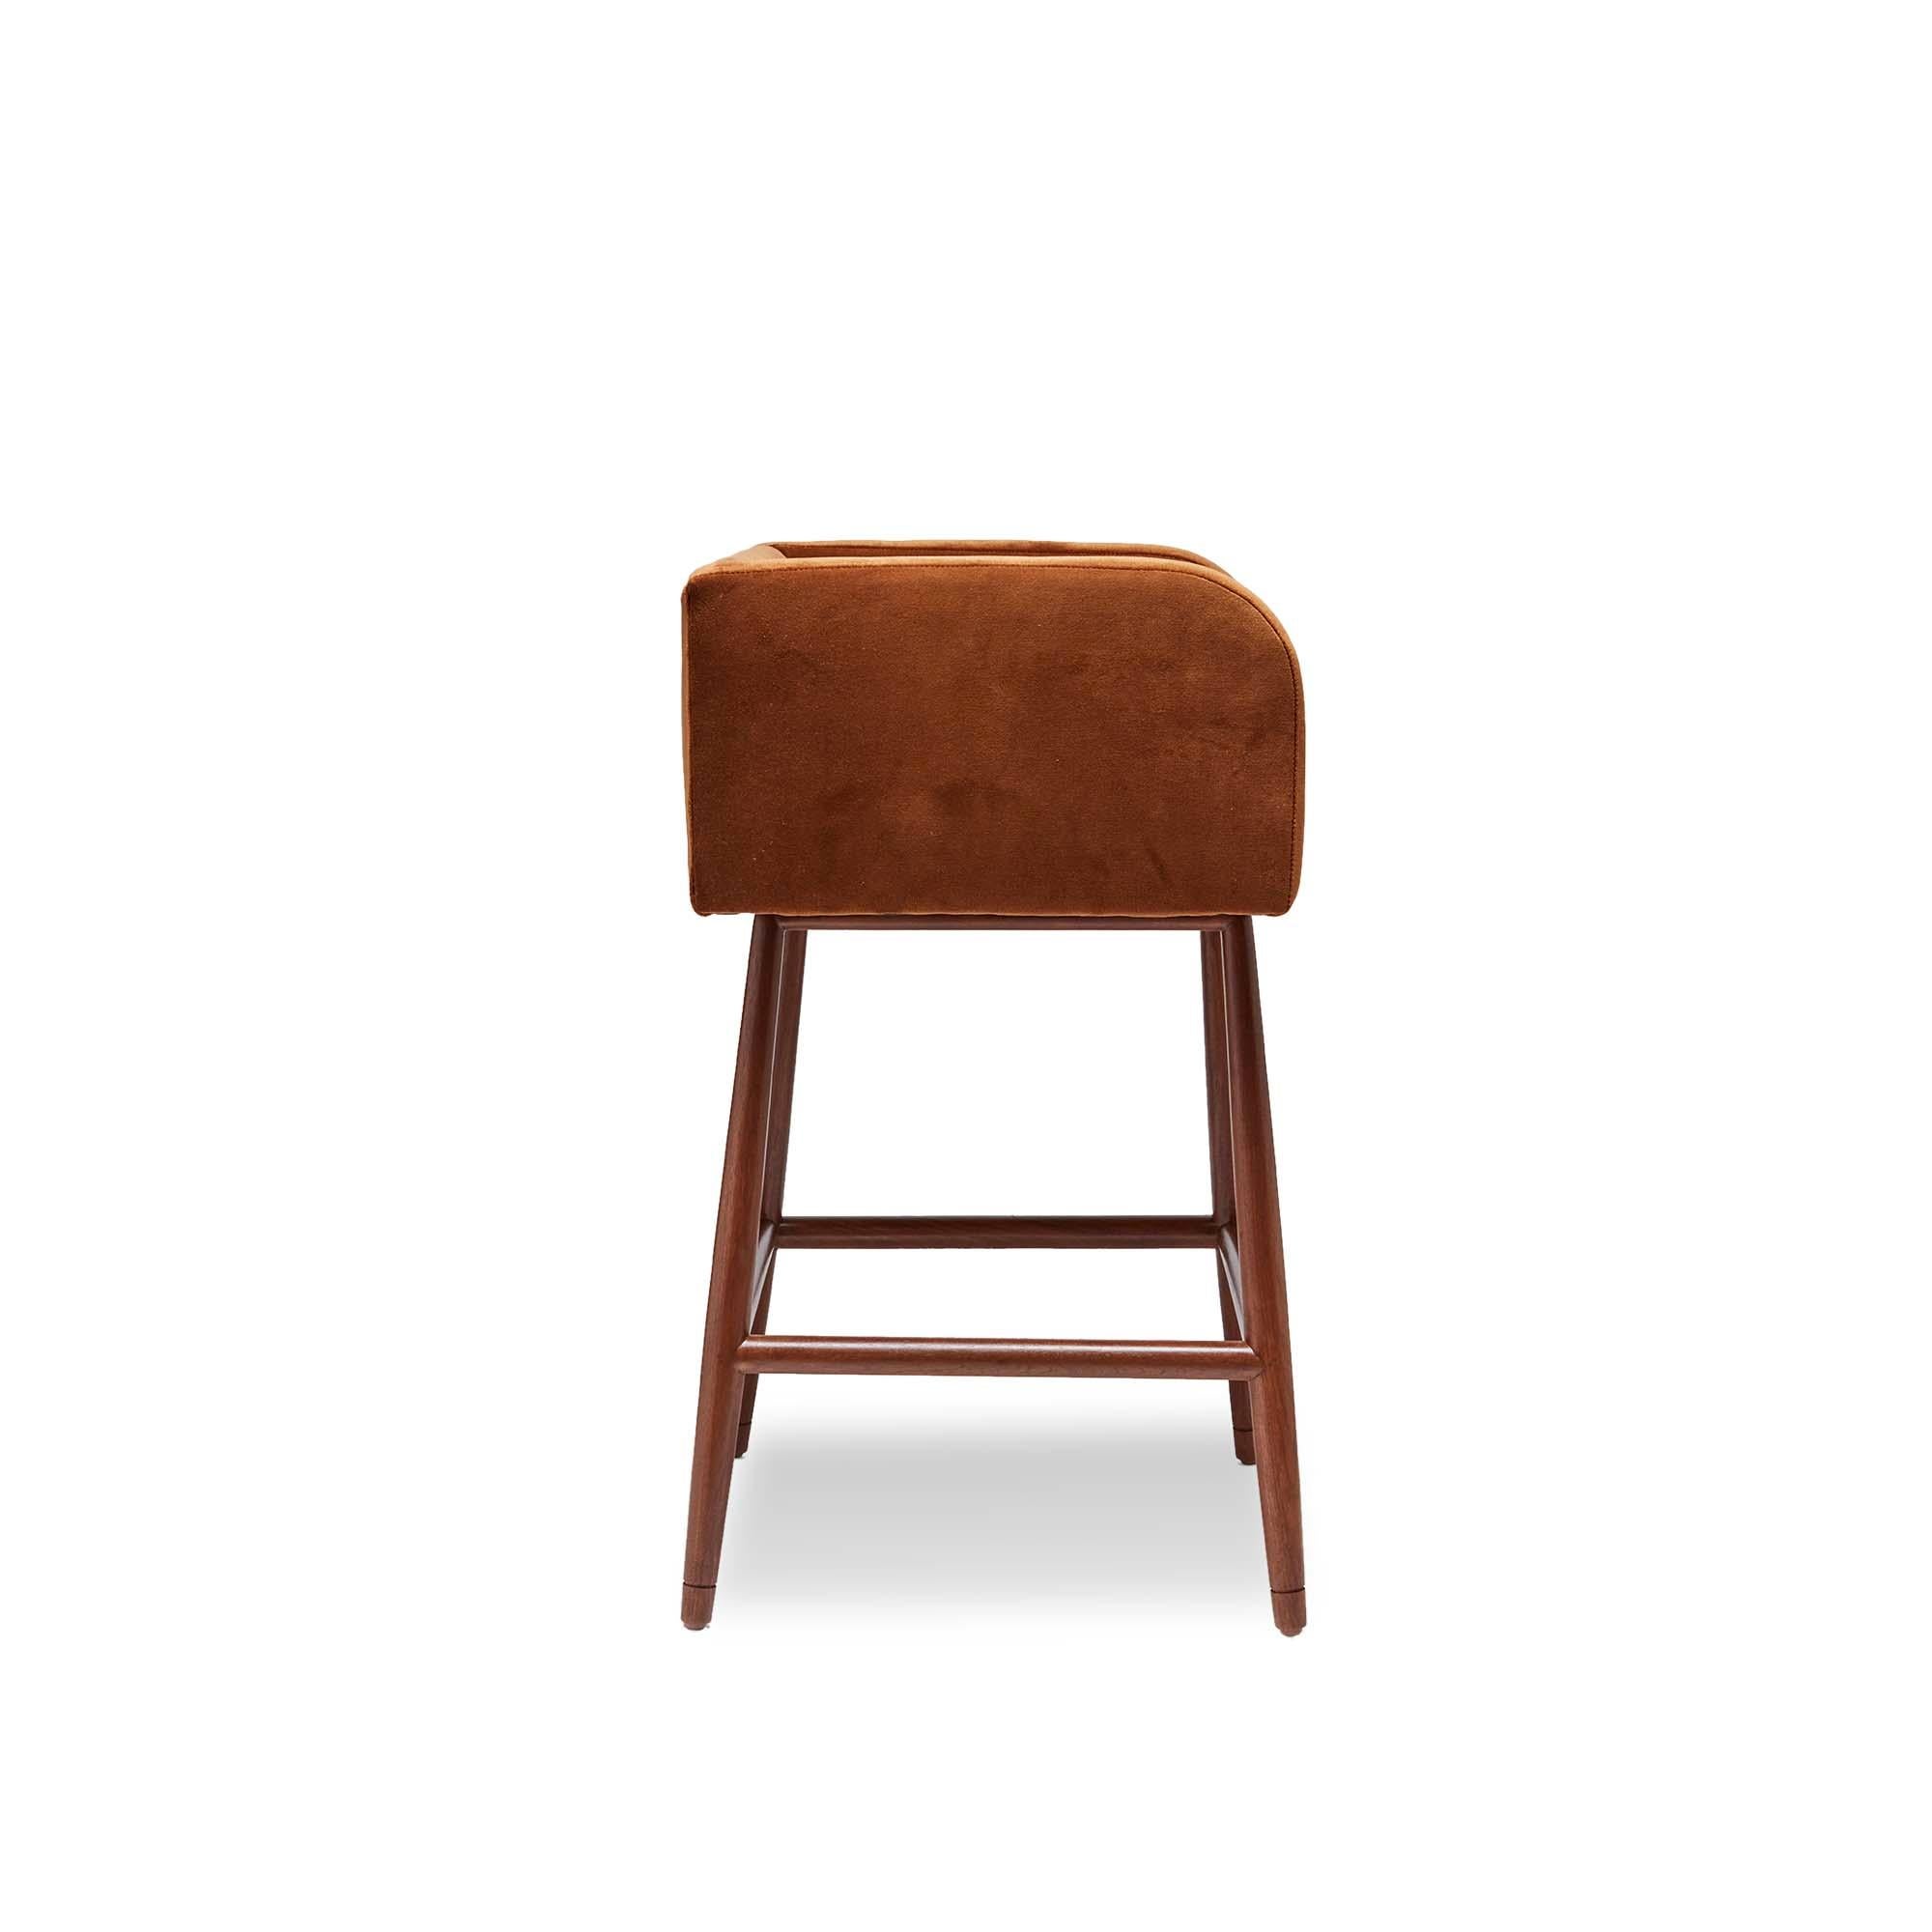 The Moreno Barstool sits low with Italian inspired arms and incised details on a solid walnut or oak base. Available to order in counter height. 

The Lawson-Fenning Collection is designed and handmade in Los Angeles, California. Reach out to